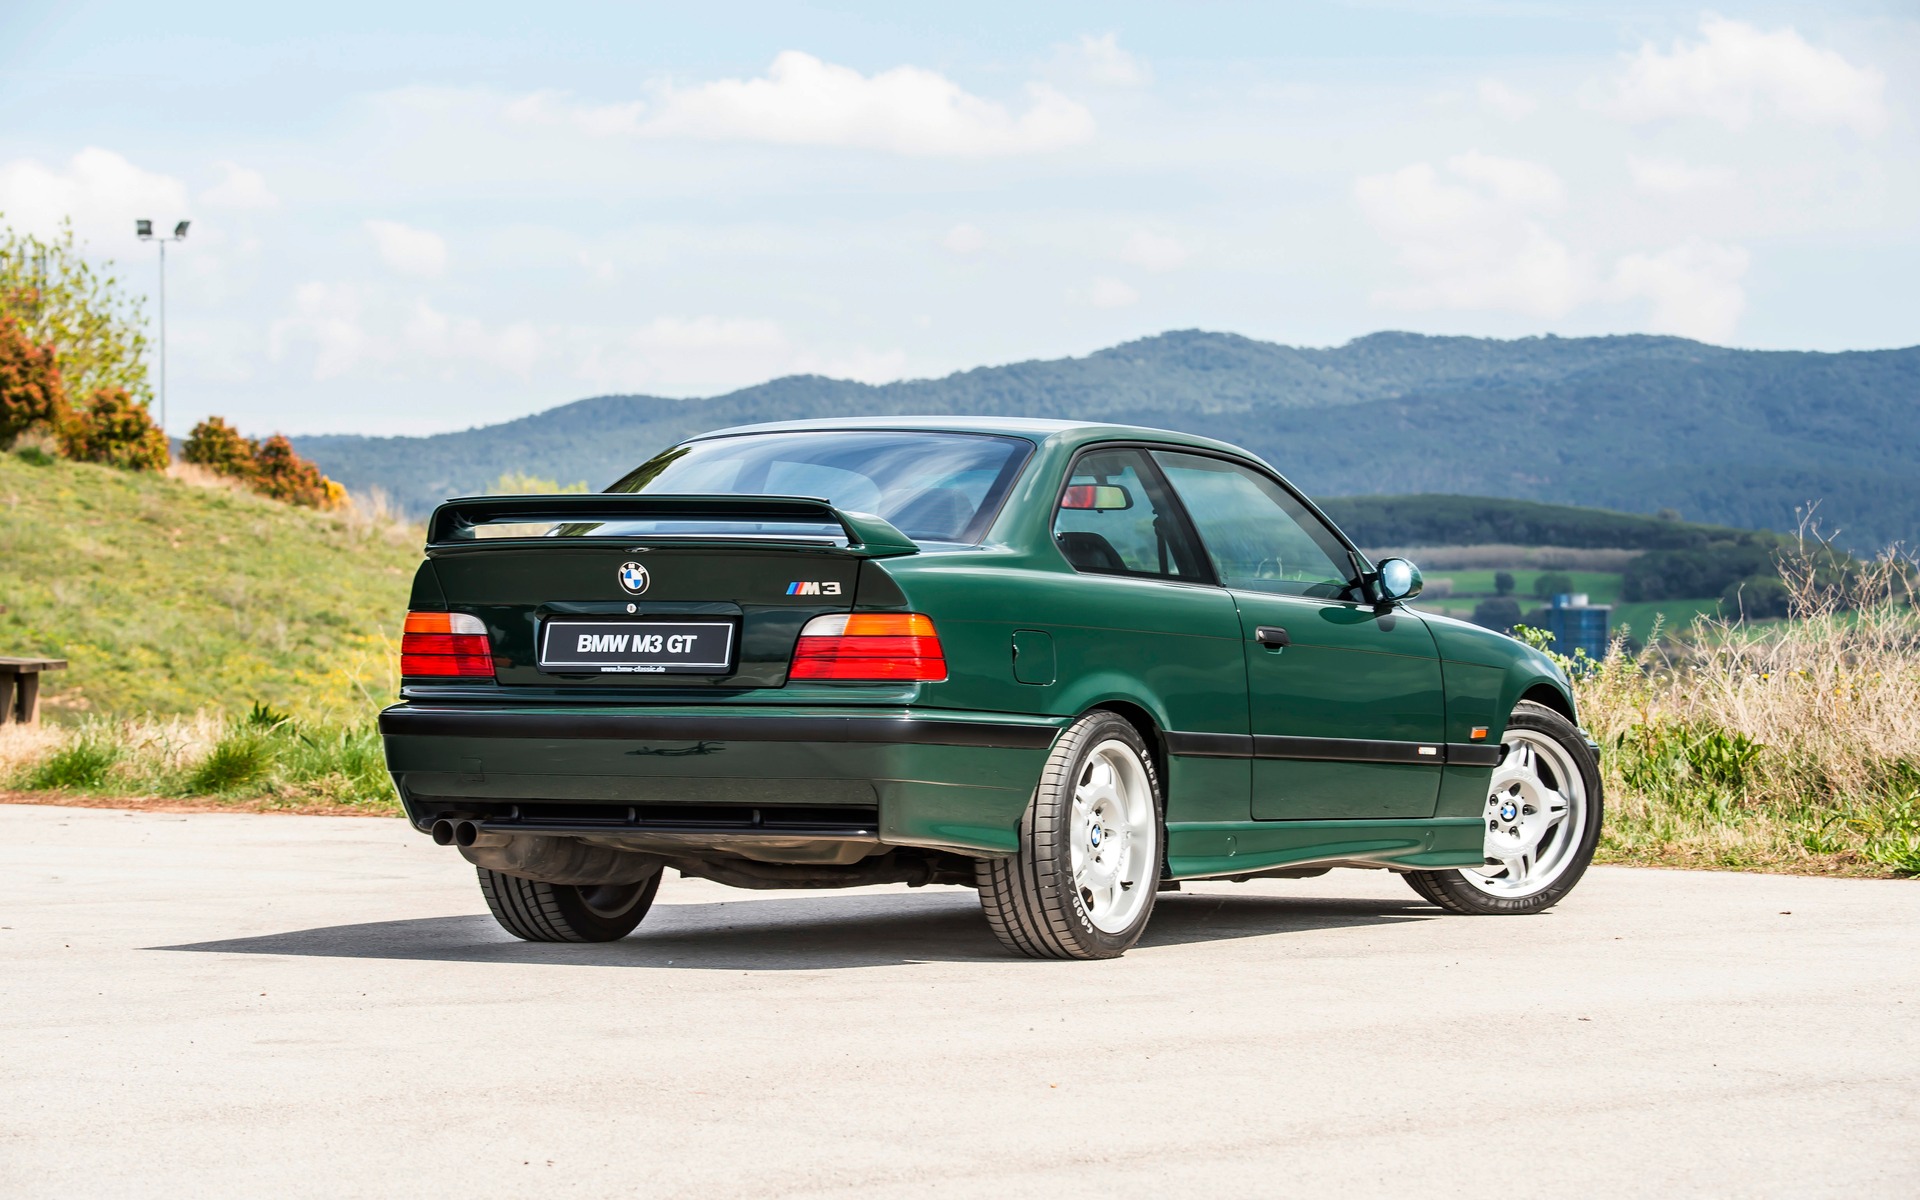 BMW M3 GT, only available in green